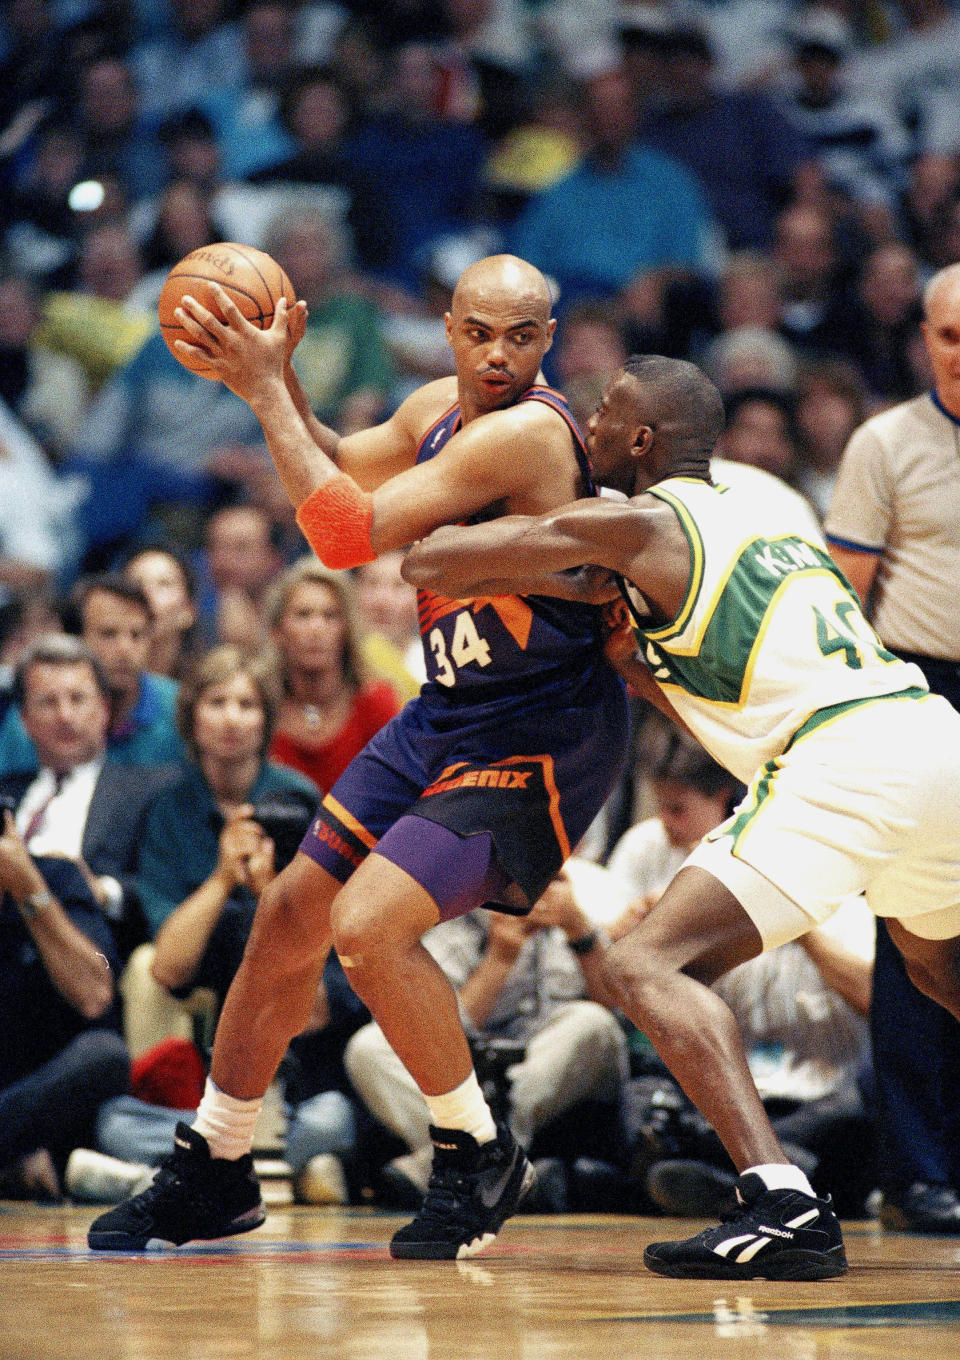 Charles Barkley's tendency to methodically back his opponents down beneath the basket prompted what was known as "The Barkley Rule" (Photo: ASSOCIATED PRESS)